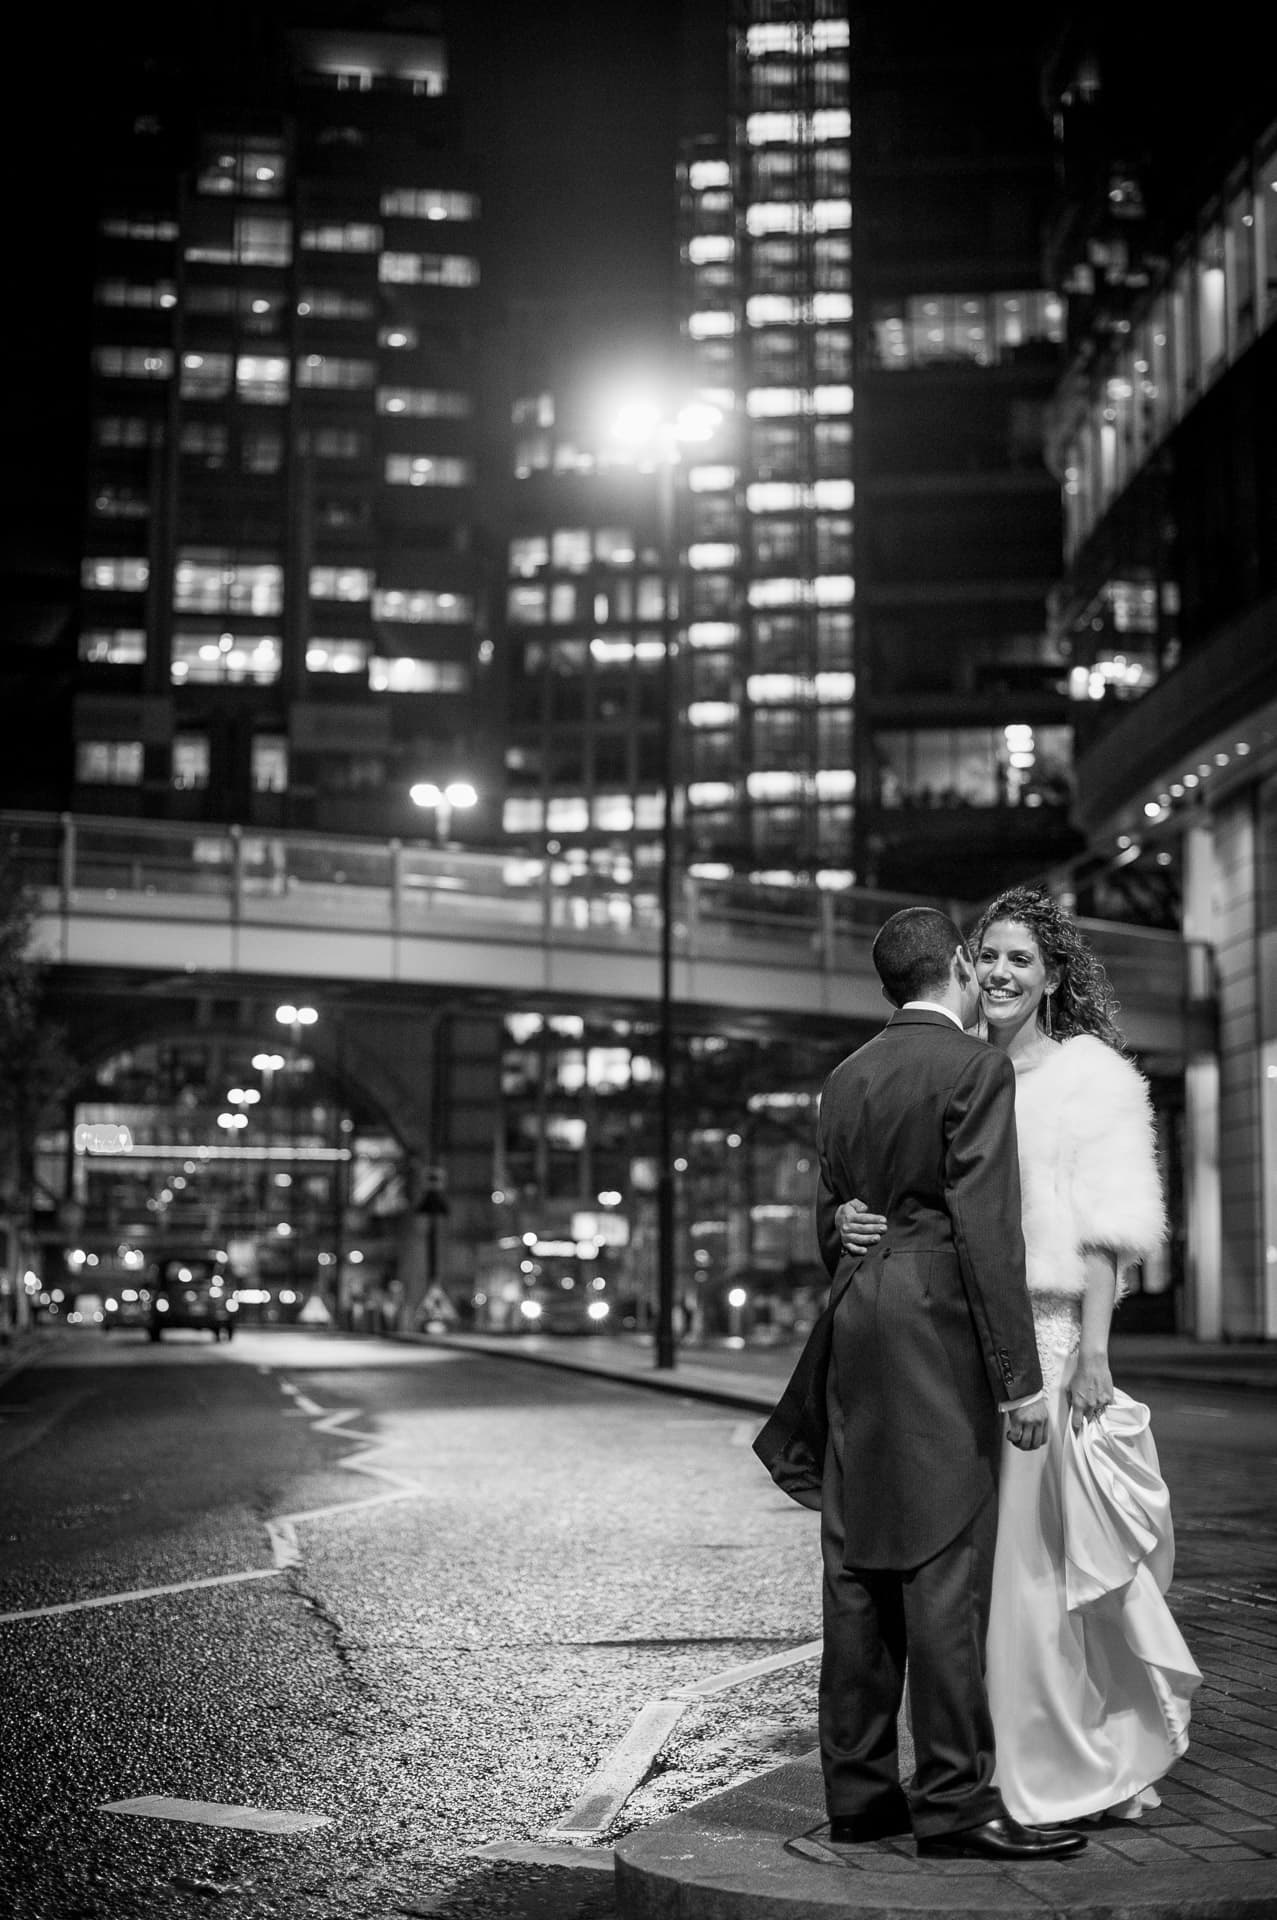 London winter wedding photo in black and white